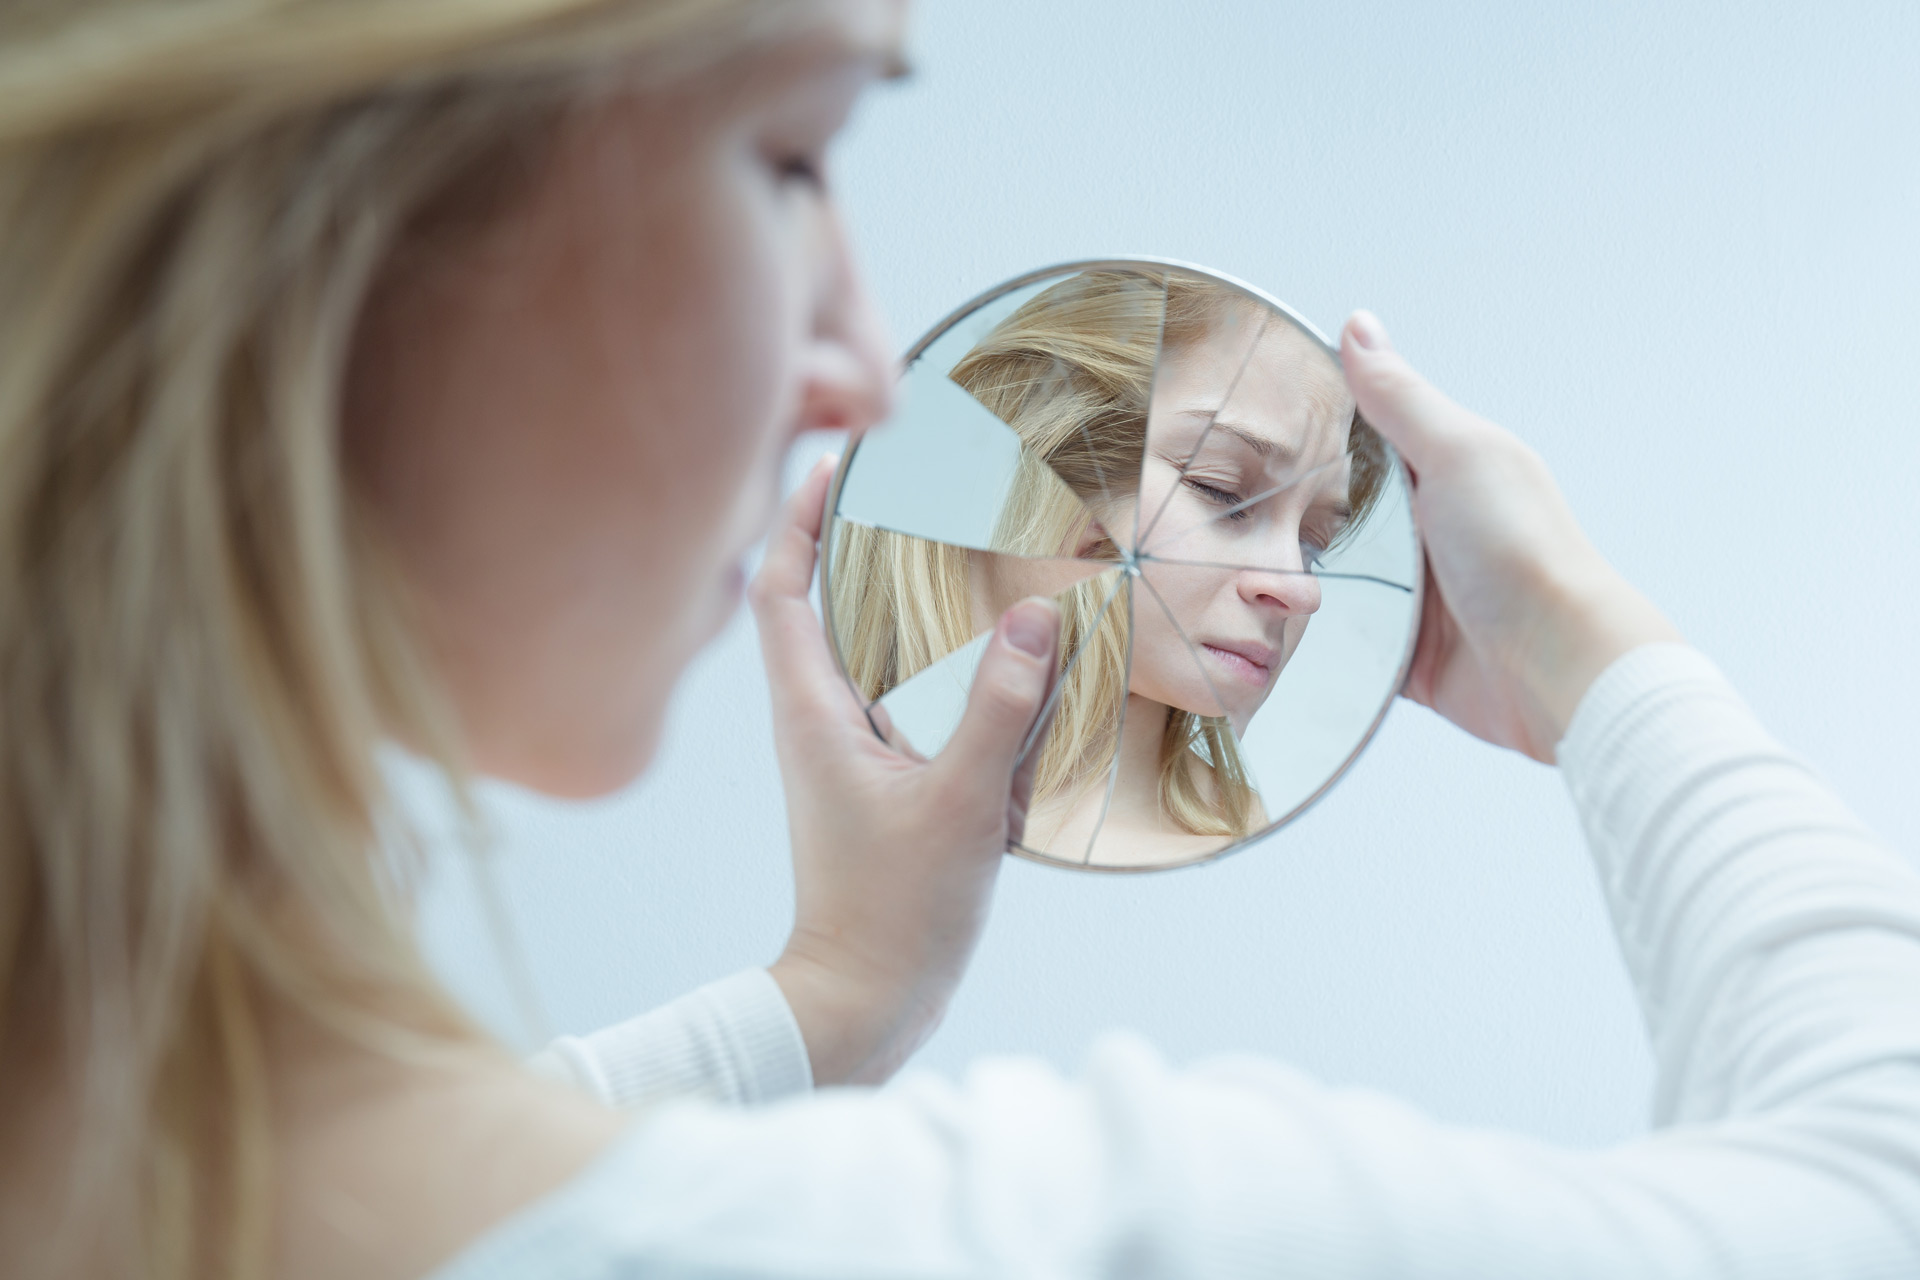 A woman with blonde hair holds a broken circular mirror close to her face, reflecting fragmented pieces of her somber expression. She gazes reflectively at the mirror, as if standing in a trauma clinic like Khiron Clinics, set against a plain, light-colored background.